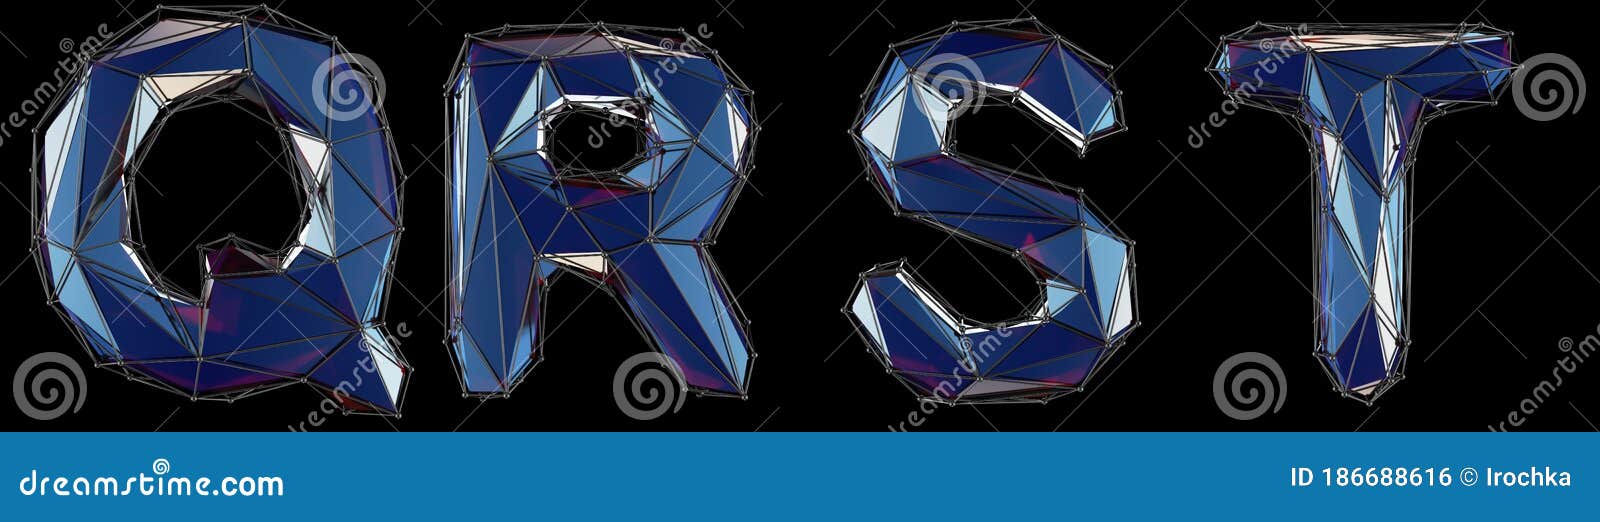 realistic 3d set of letters q, r, s, t made of low poly style. collection s of low poly style blue color glass